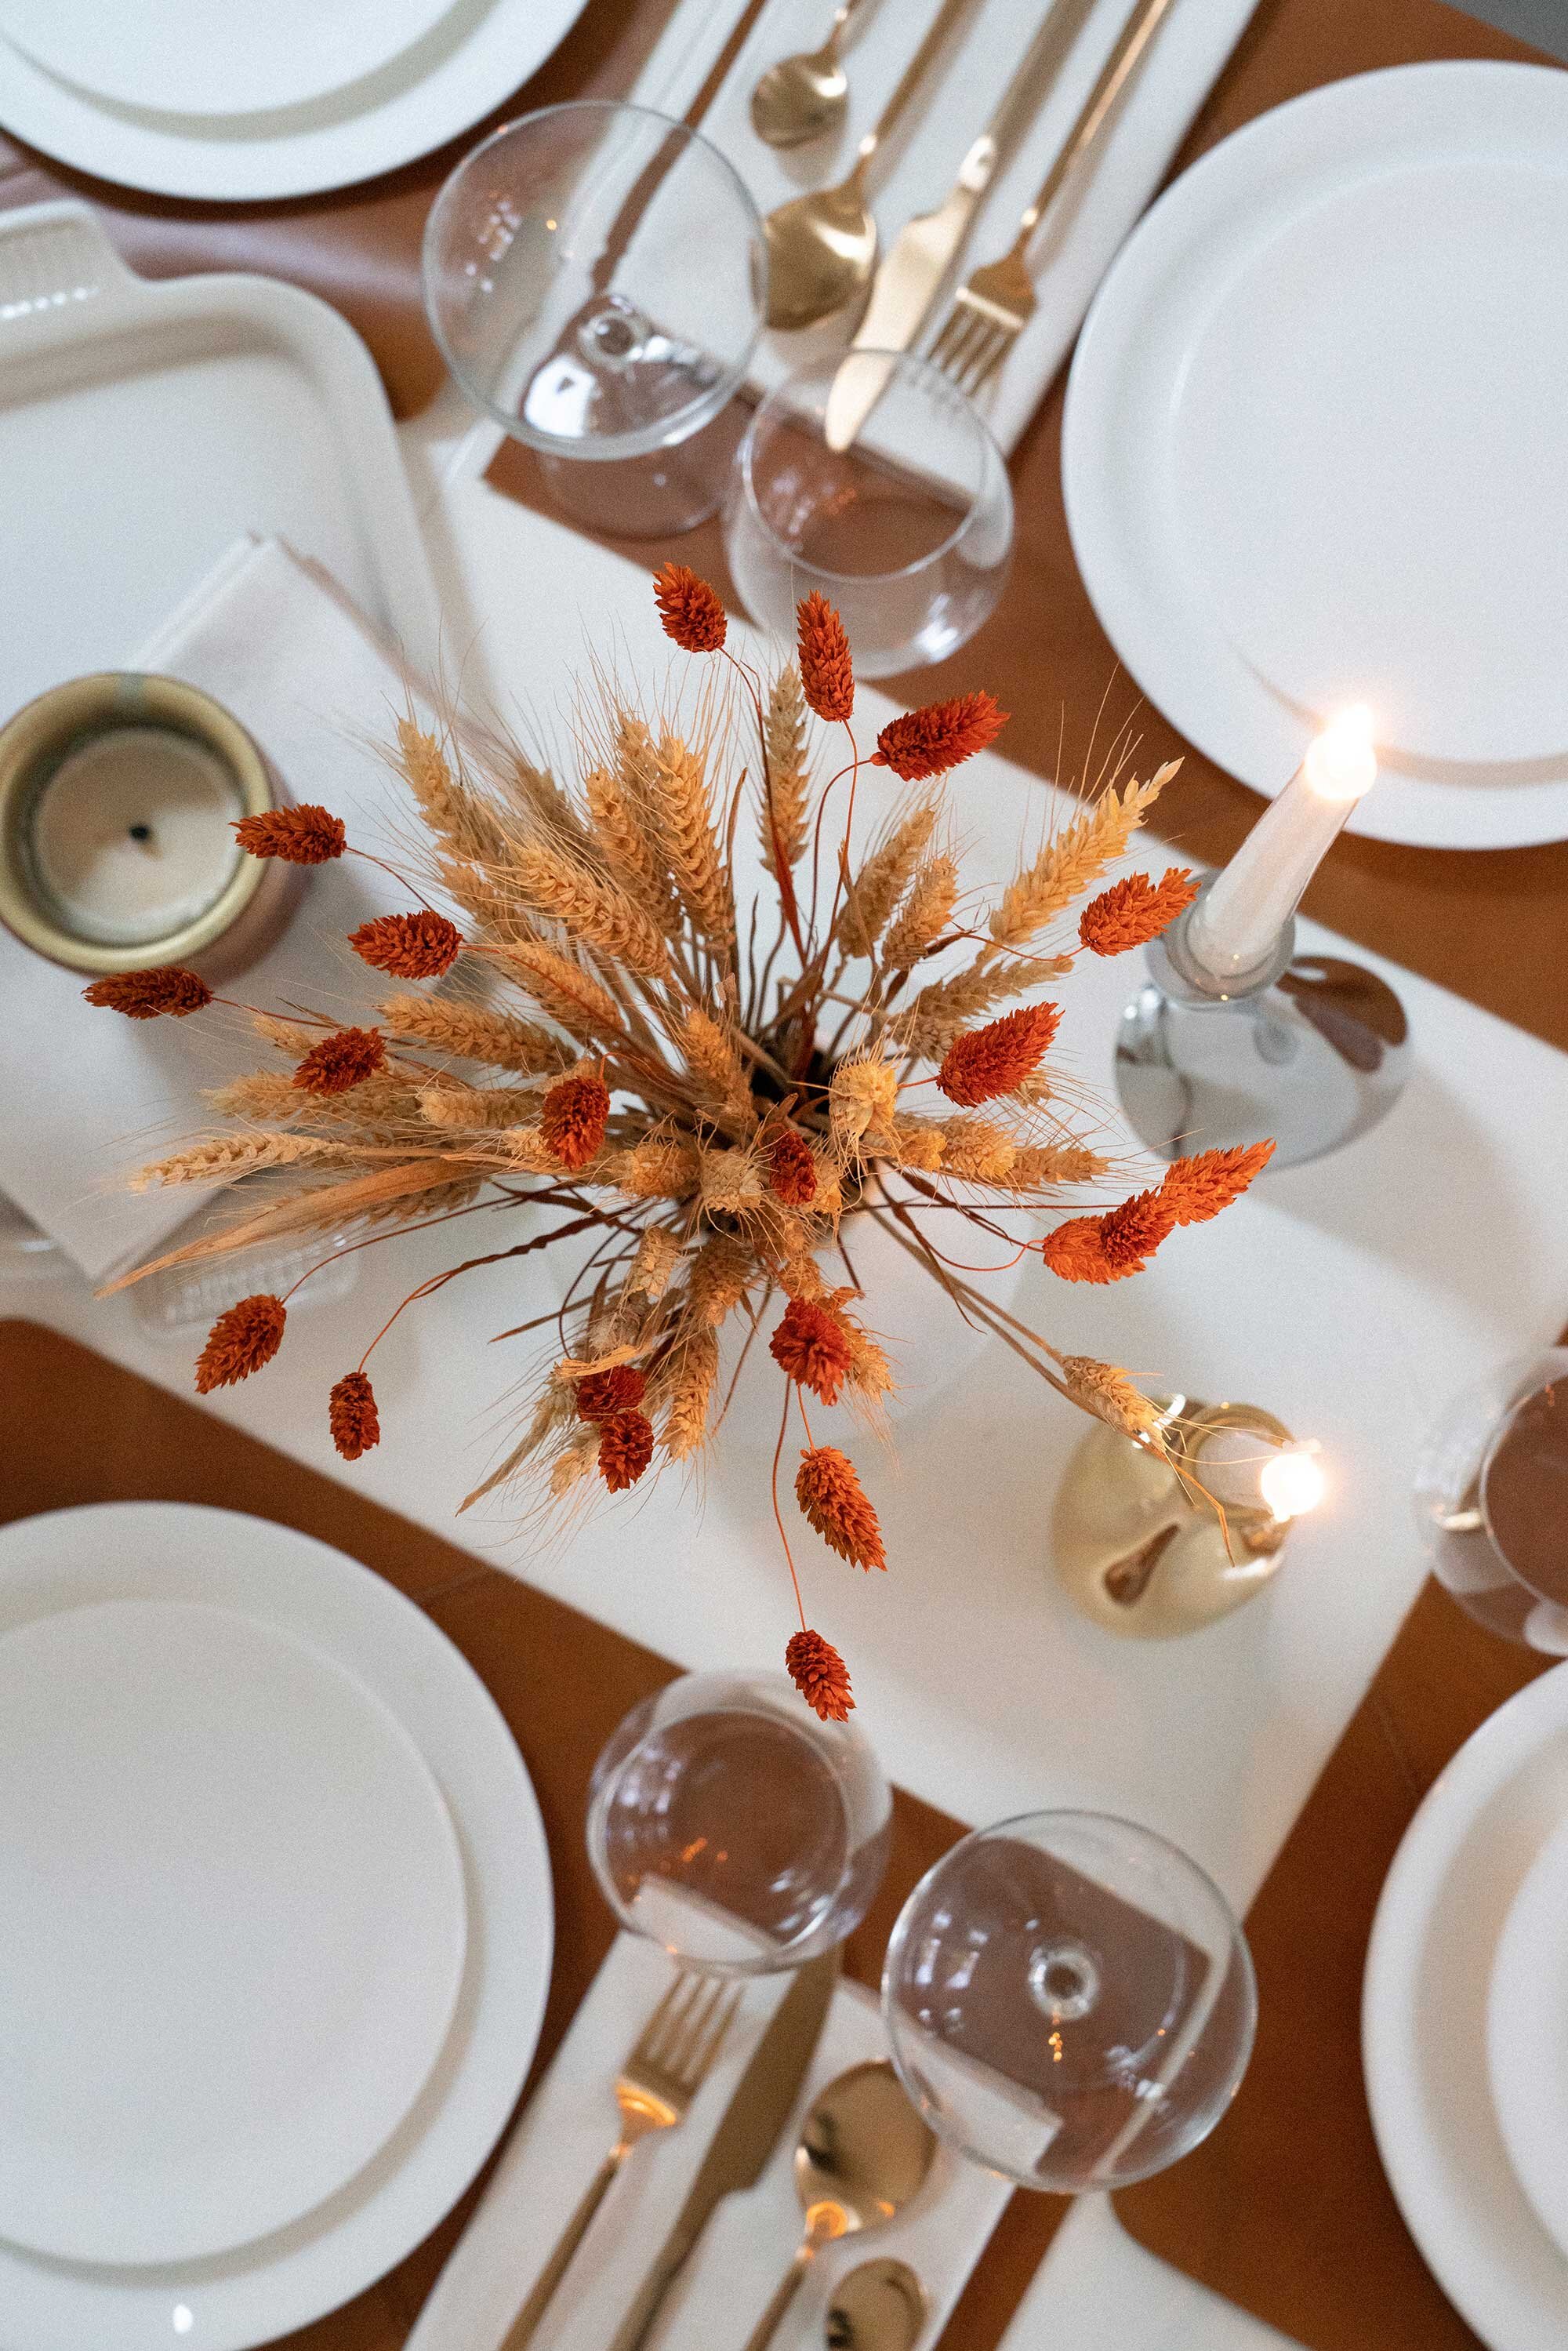 Thanksgiving table settings elegant gold. Sarah Butler of @sarahchristine Thanksgiving table settings featuring Georg Jensen Cobra Candleholder Set, tan leather placemats, and modern gold plated flatware with rustic dried flowers 9.jpg